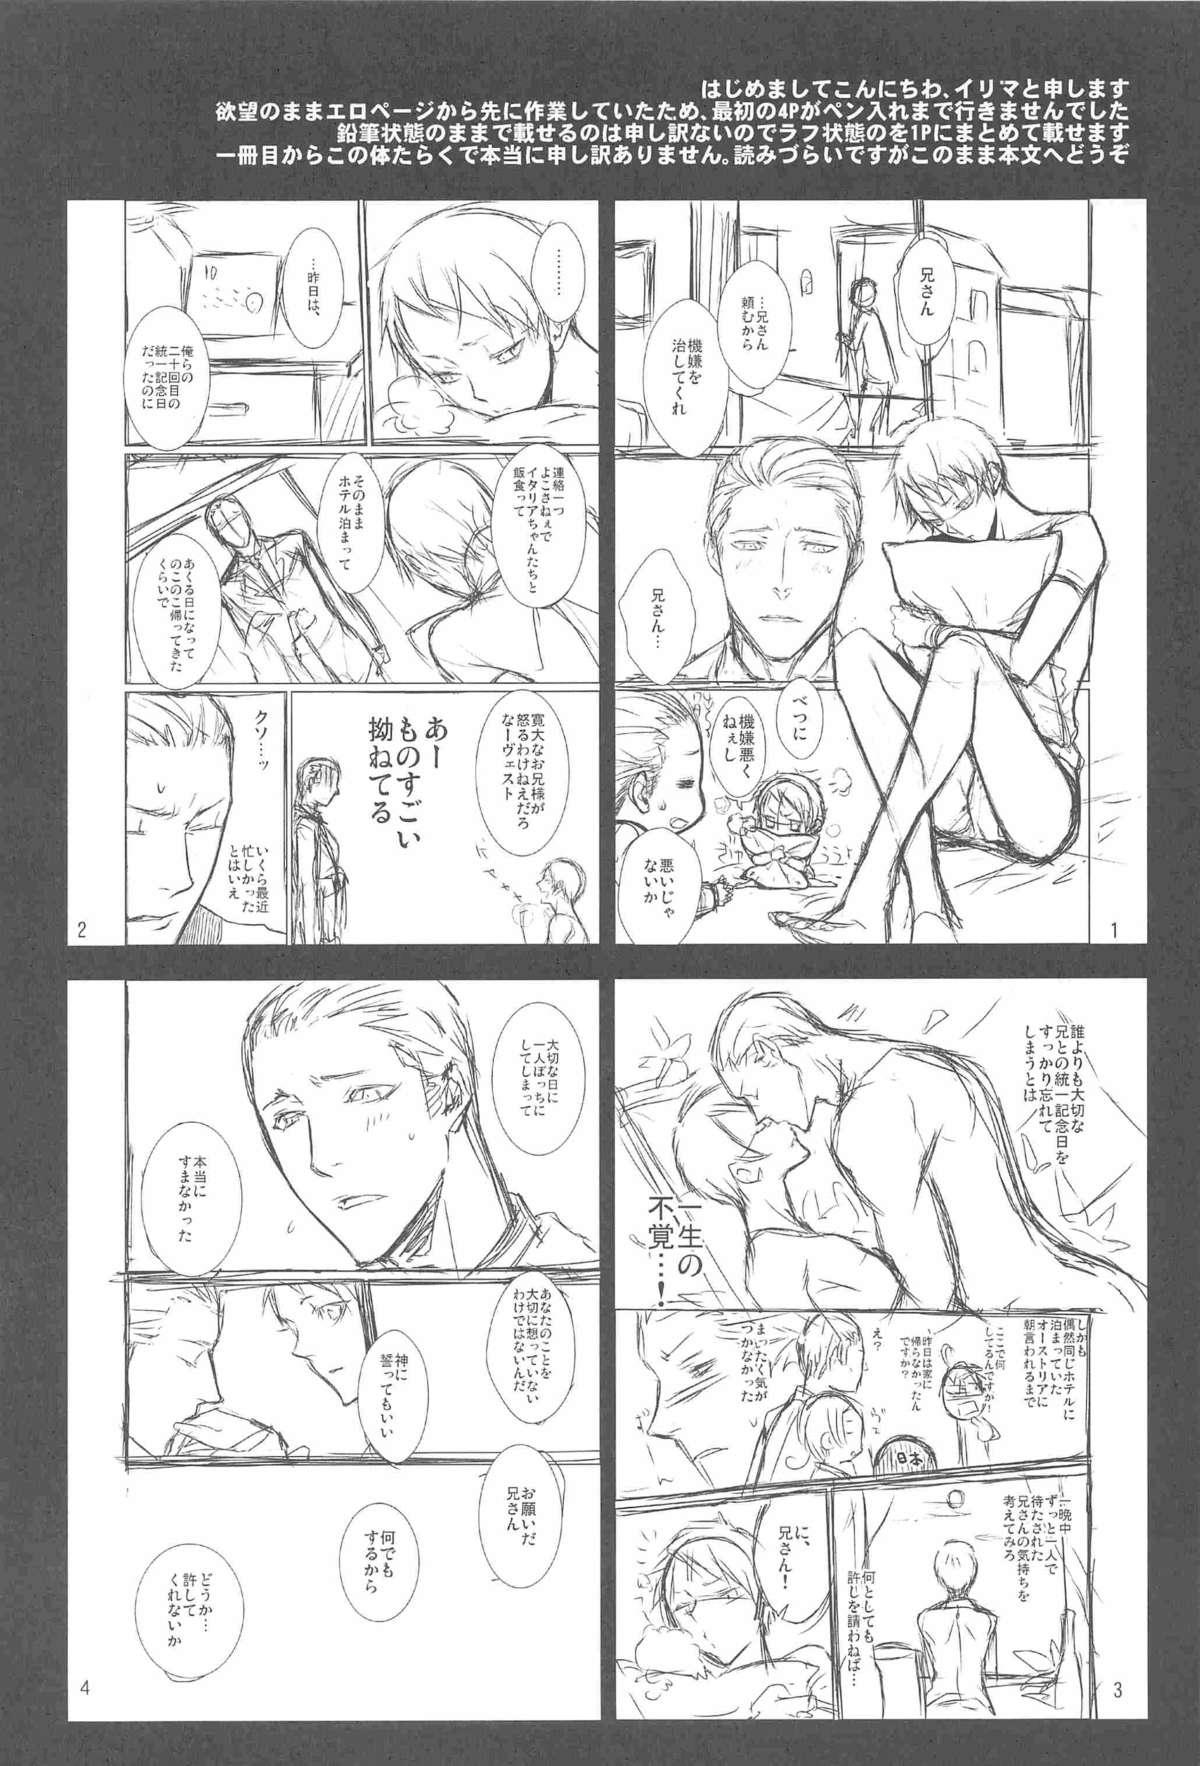 Collar Notgeil - Axis powers hetalia 3some - Page 4